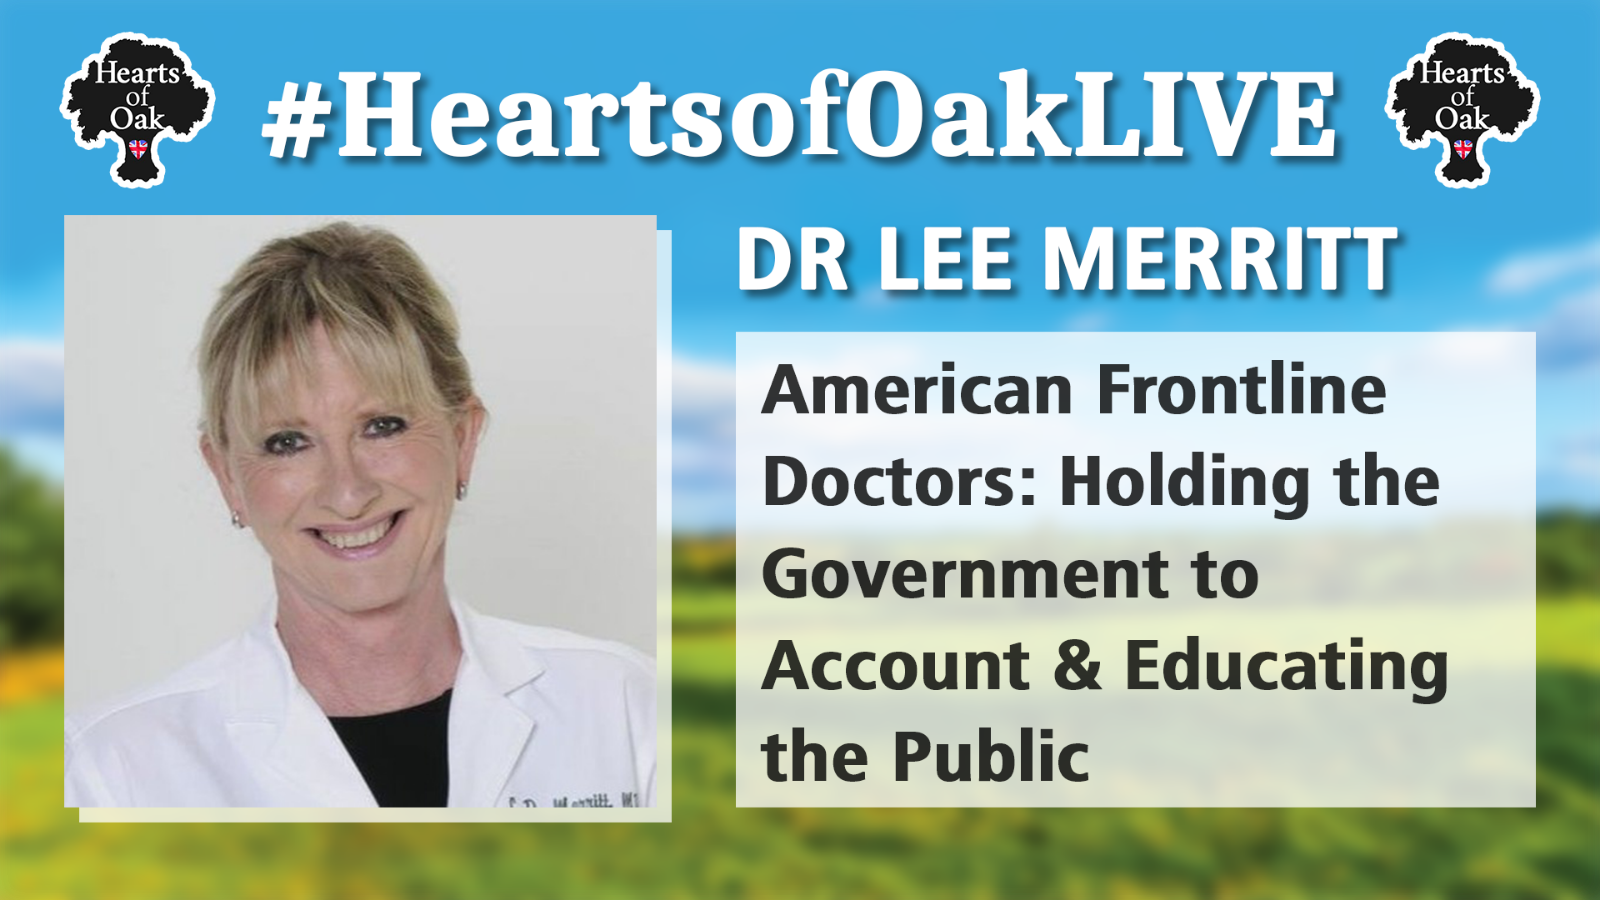 Dr Lee Merritt: American Frontline Doctors - Holding the Government to Account & Educating the Public